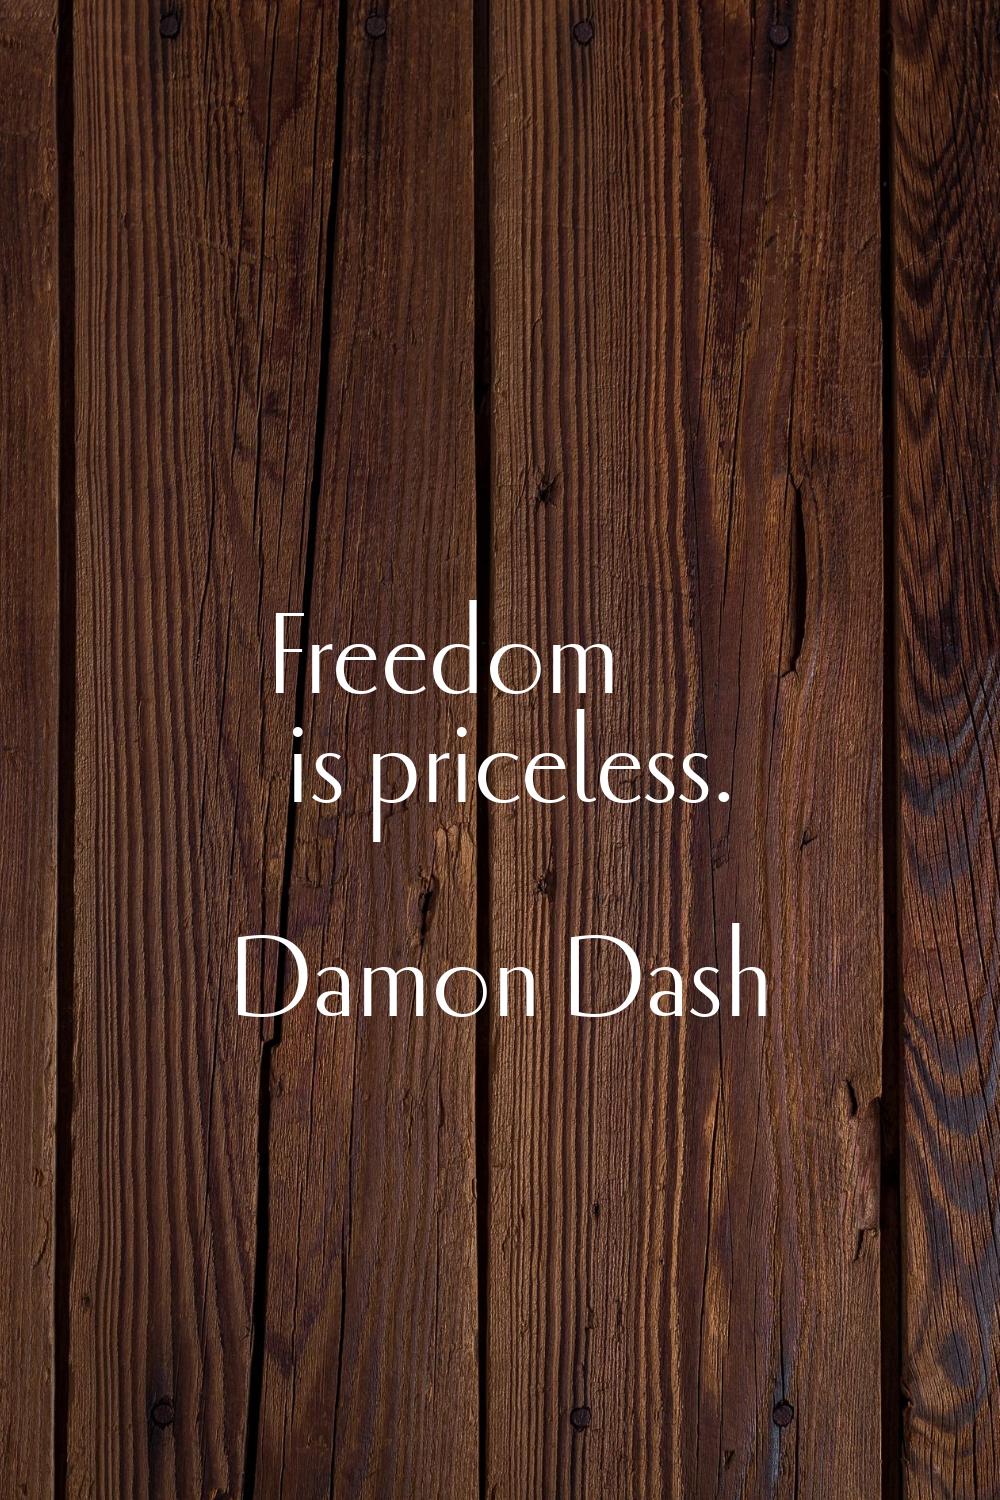 Freedom is priceless.